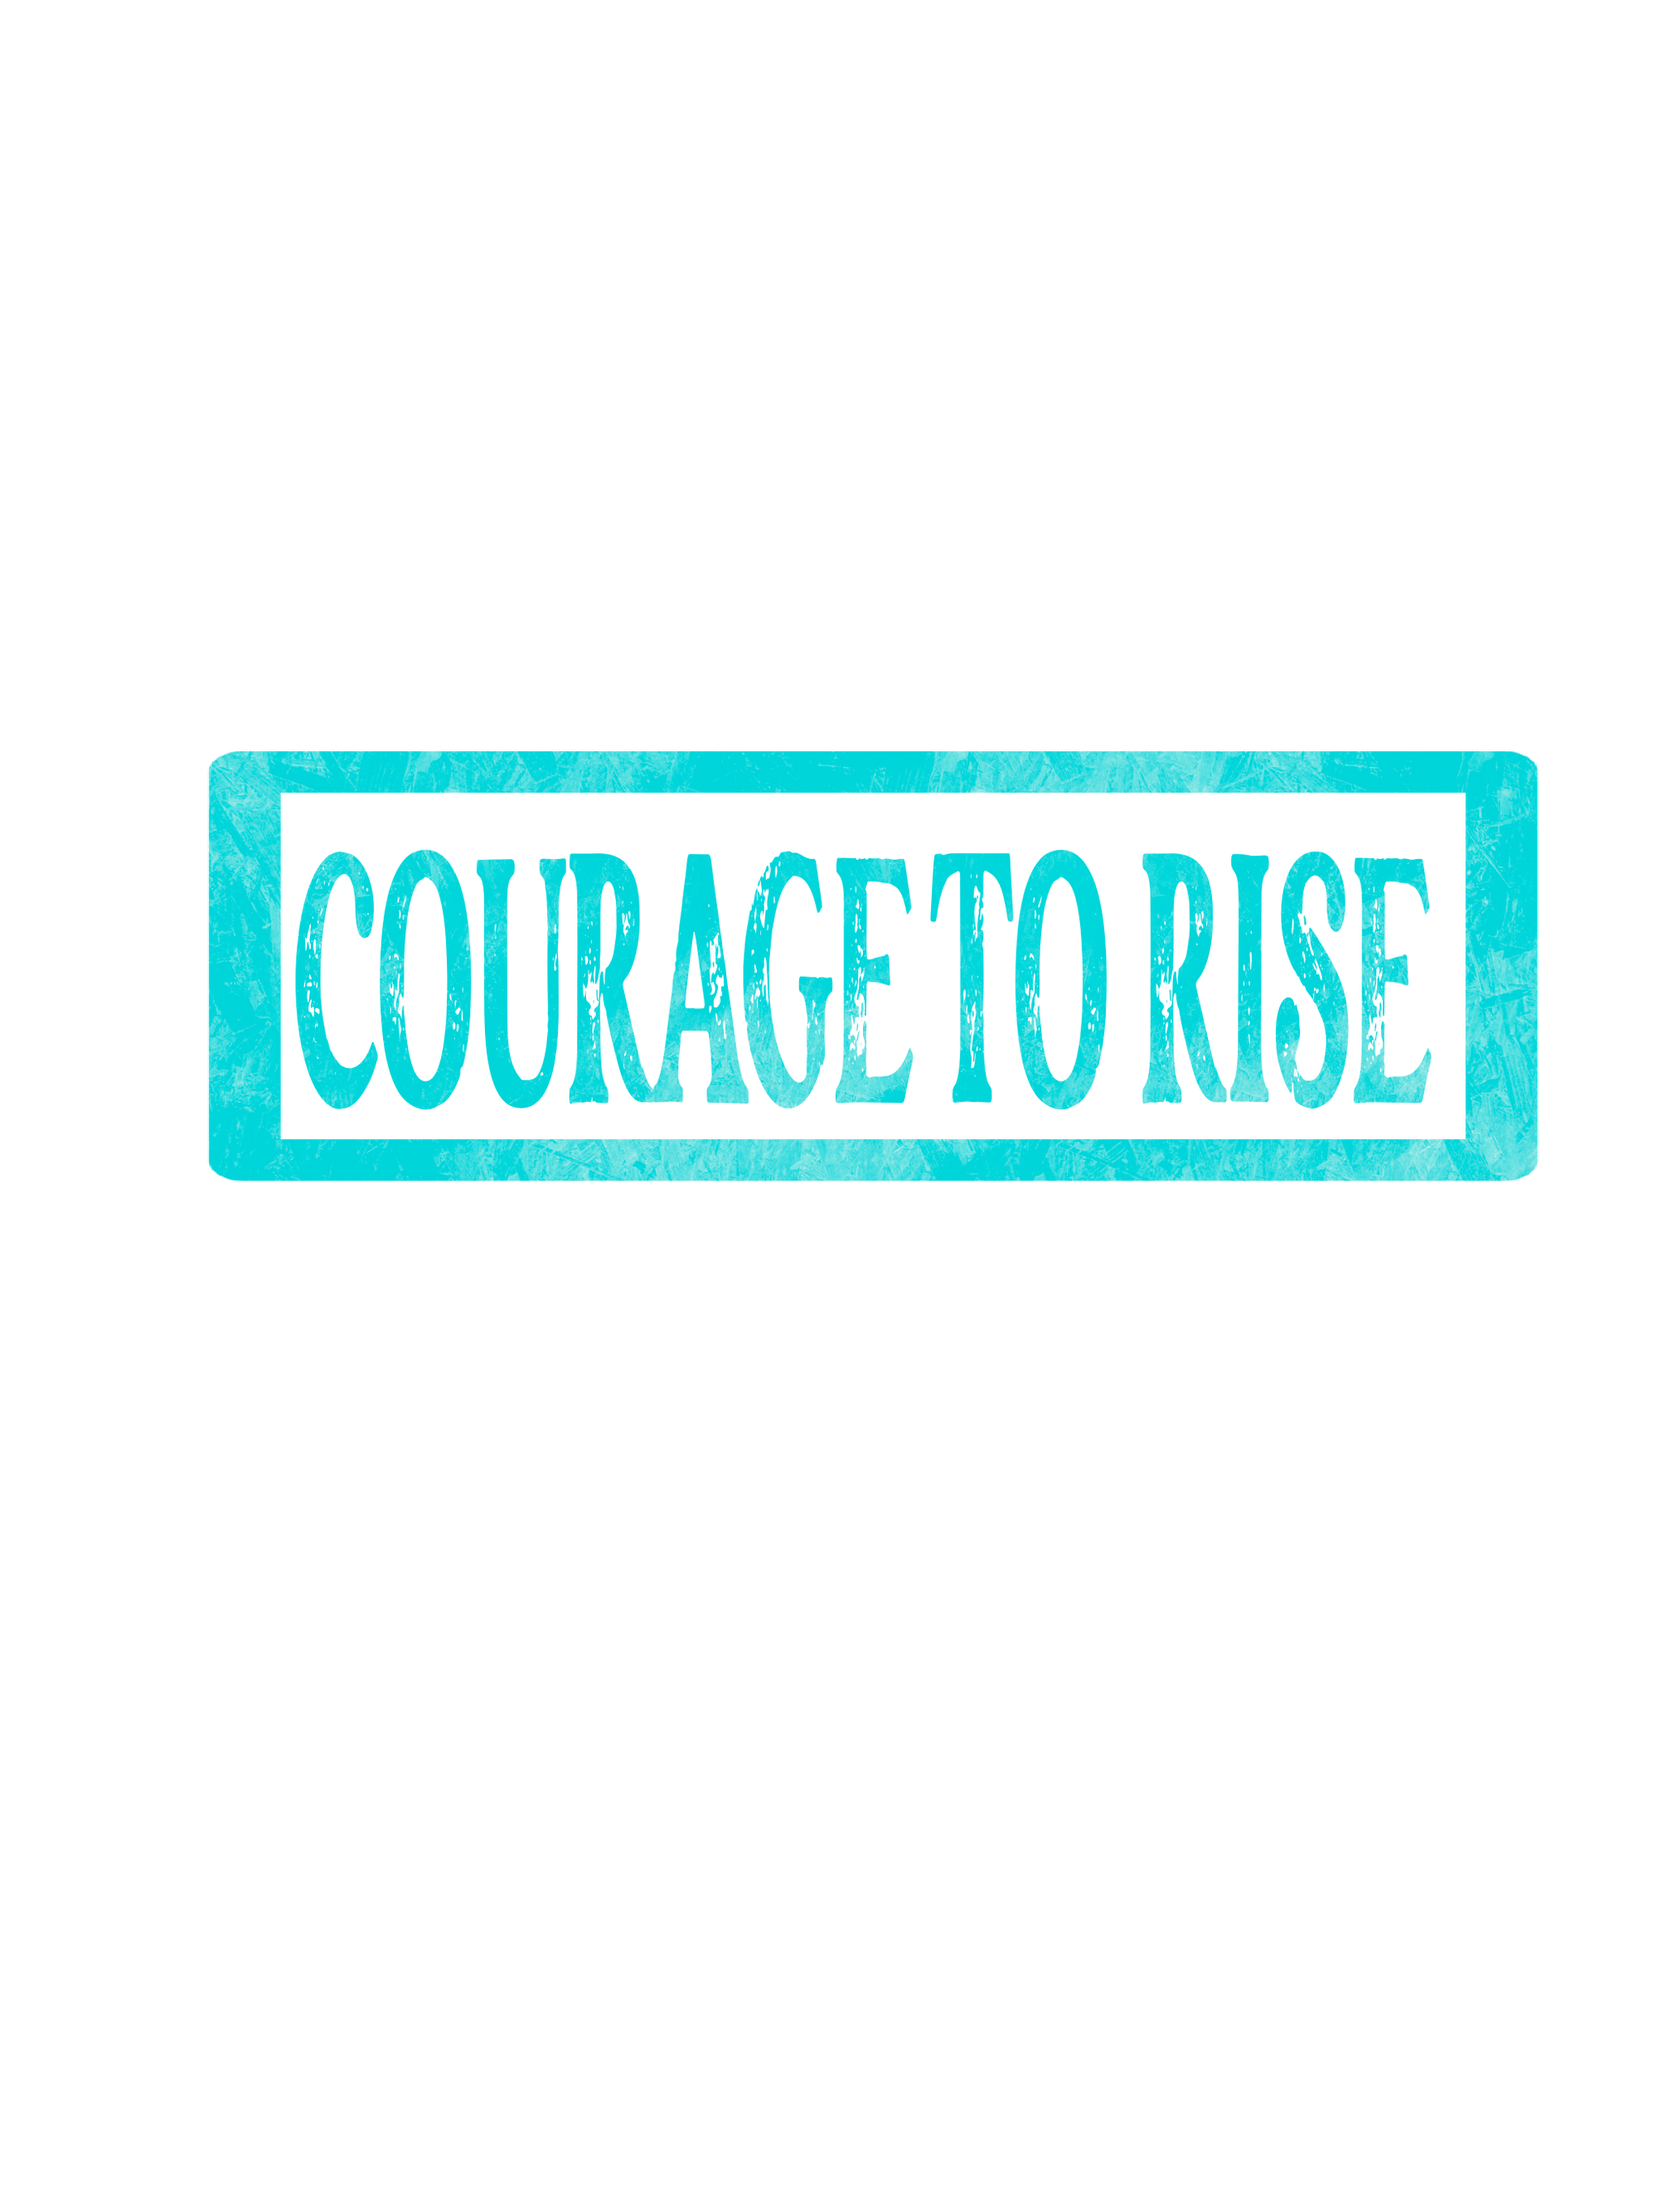 COURAGE TO RISE CAN GLASS (BAMBOO LID & STRAW)